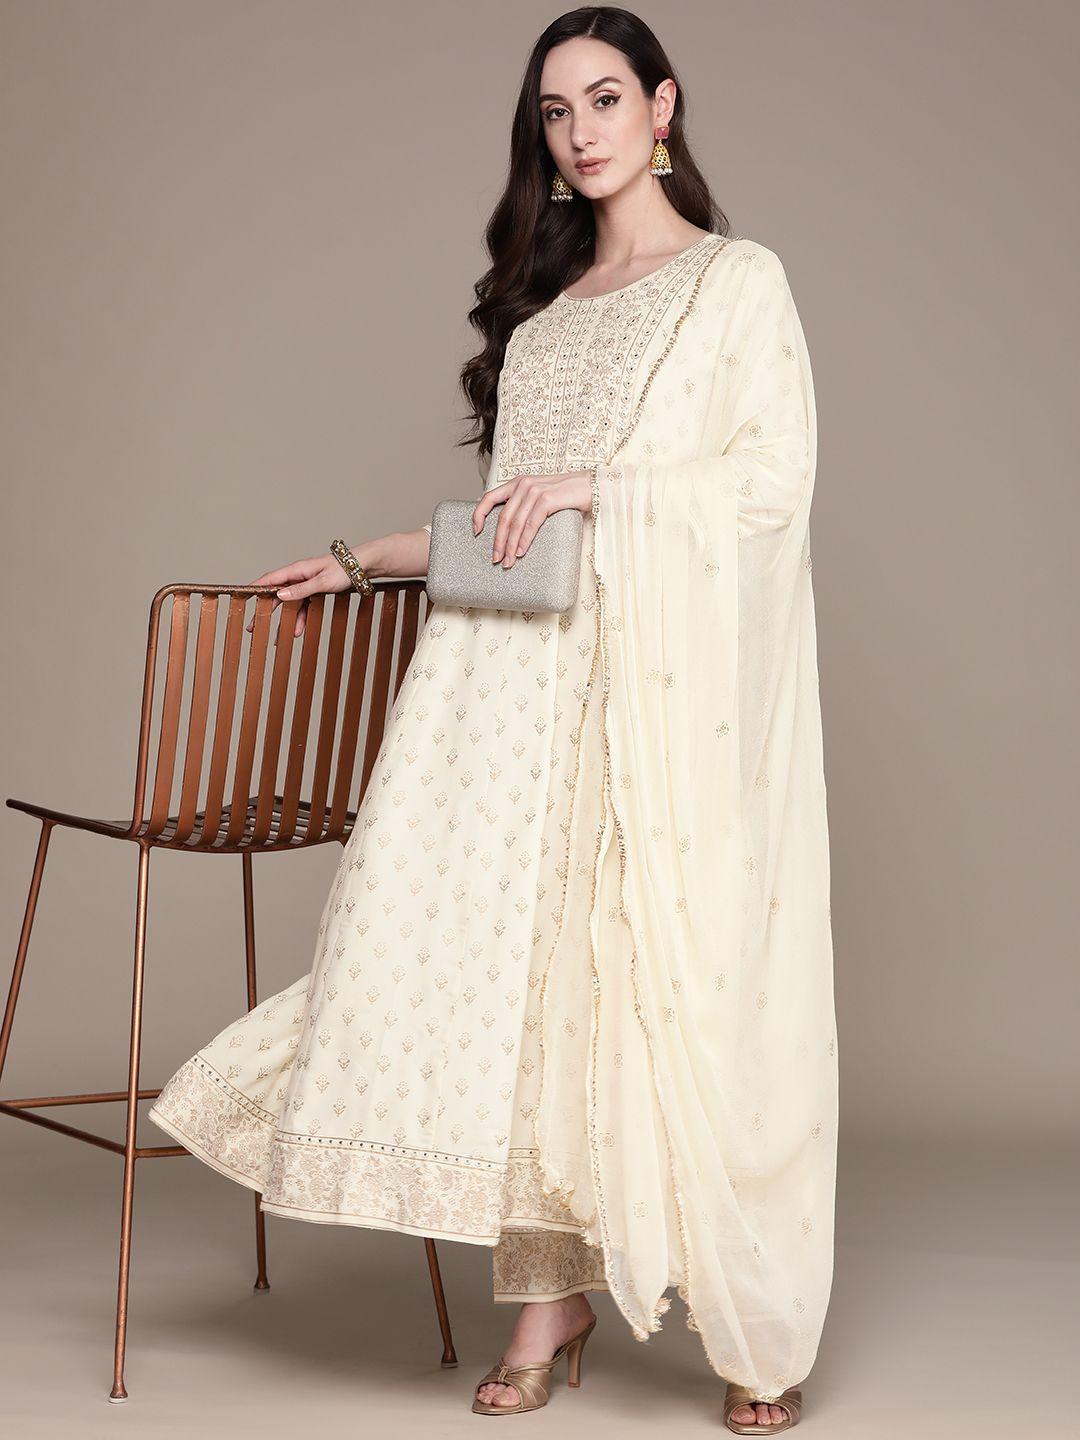 anubhutee-floral-embroidered-regular-mirror-work-kurta-with-trousers-&-with-dupatta